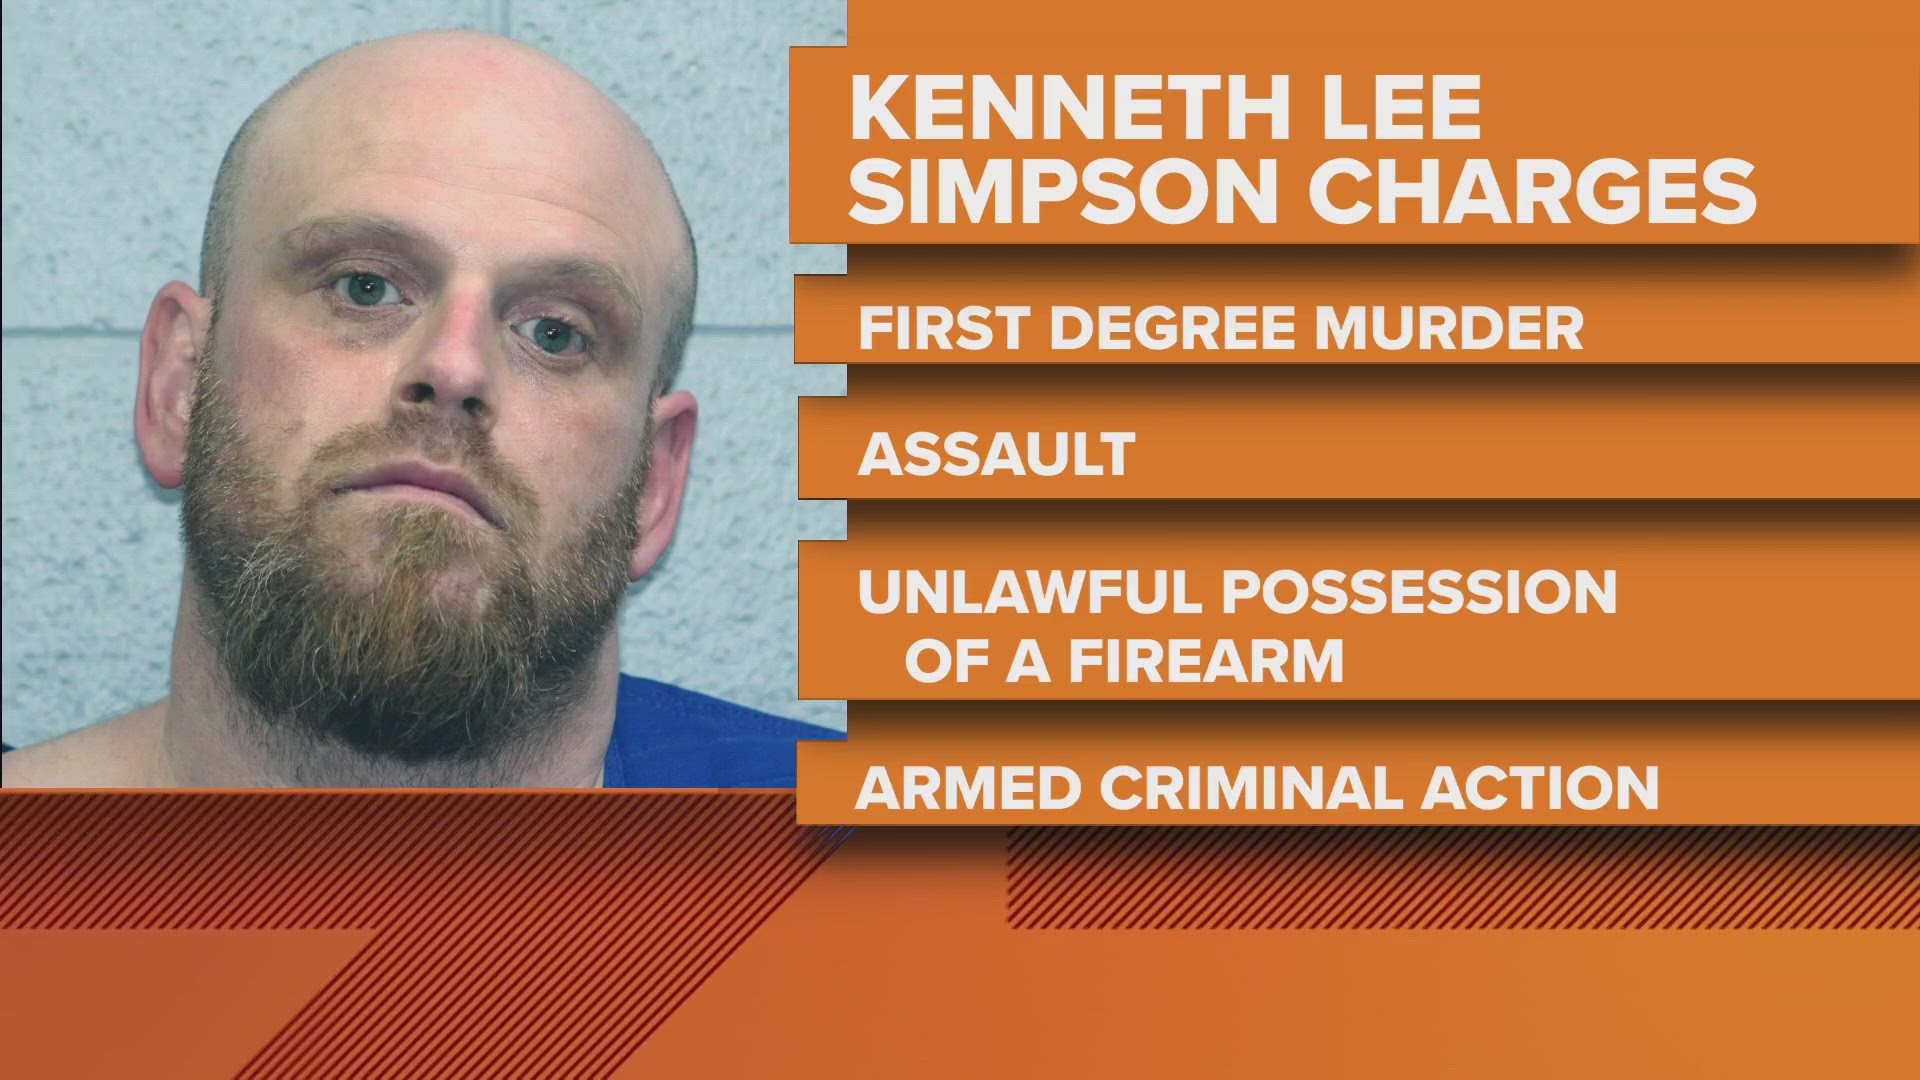 Kenneth Lee Simpson surrendered to police Monday after a 16-hour standoff. He's scheduled to make his first court appearance Wednesday.